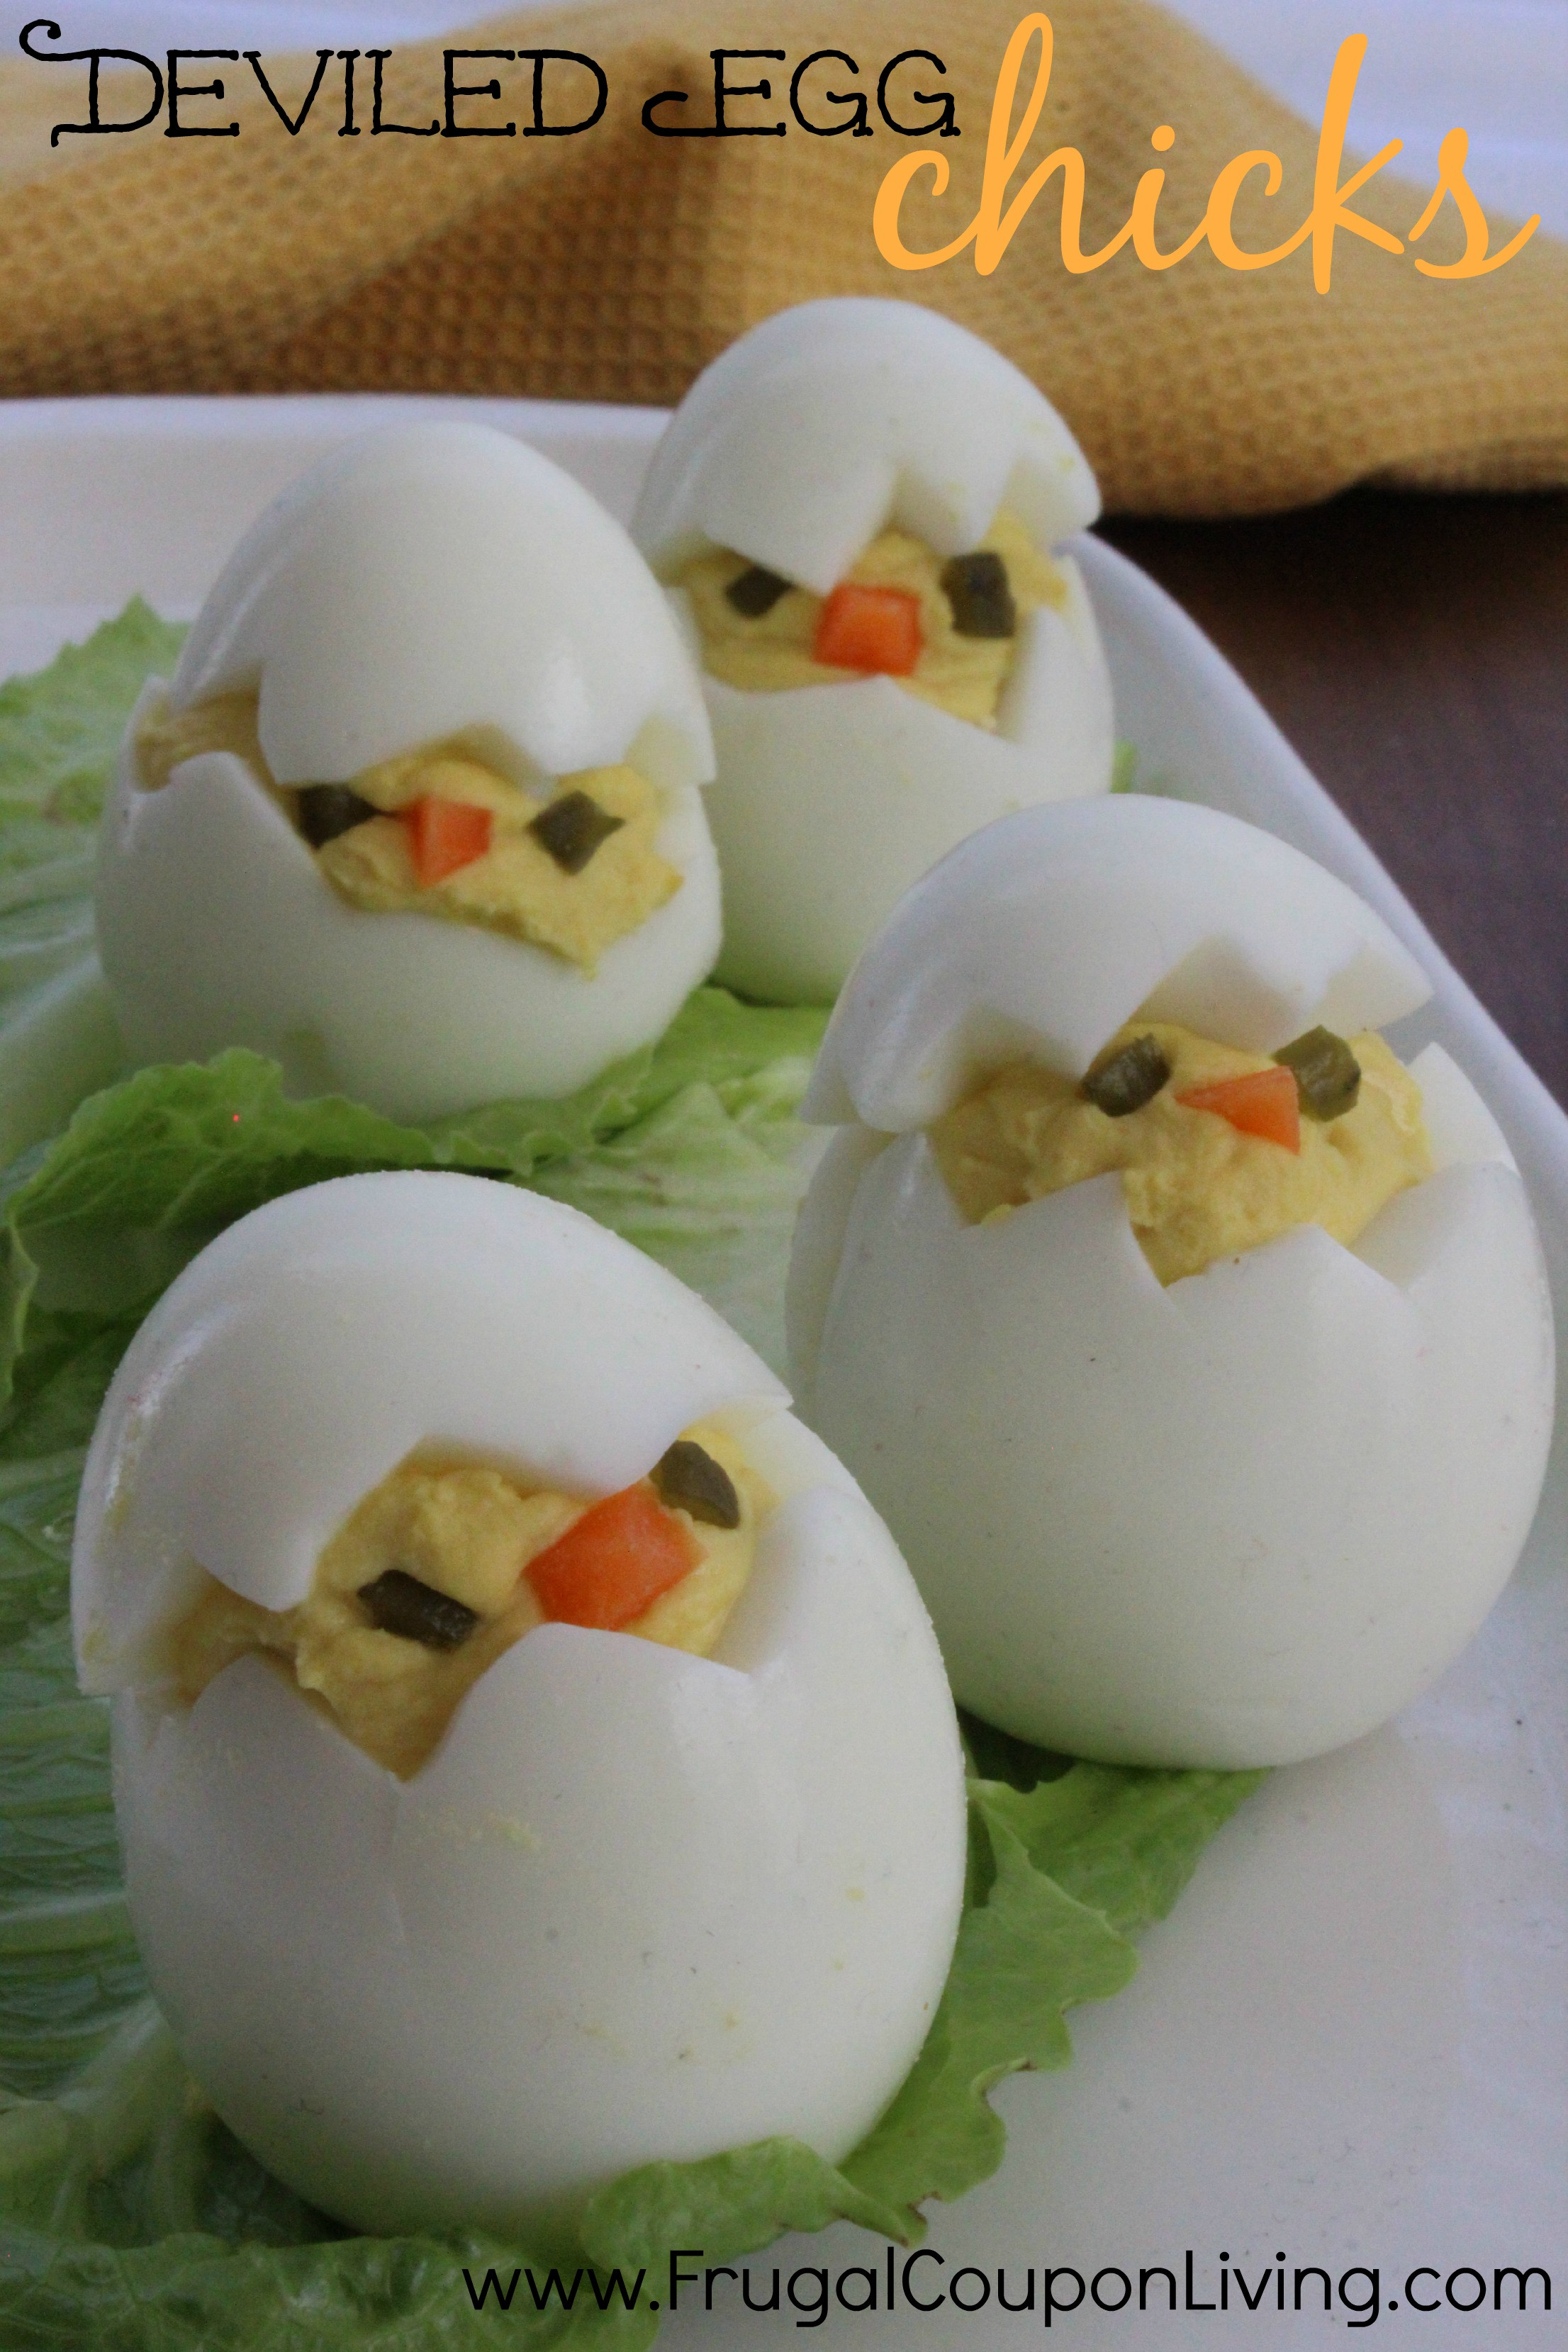 Easter Chick Deviled Eggs
 Easter Deviled Egg Chicks Recipe Twist on the Norm